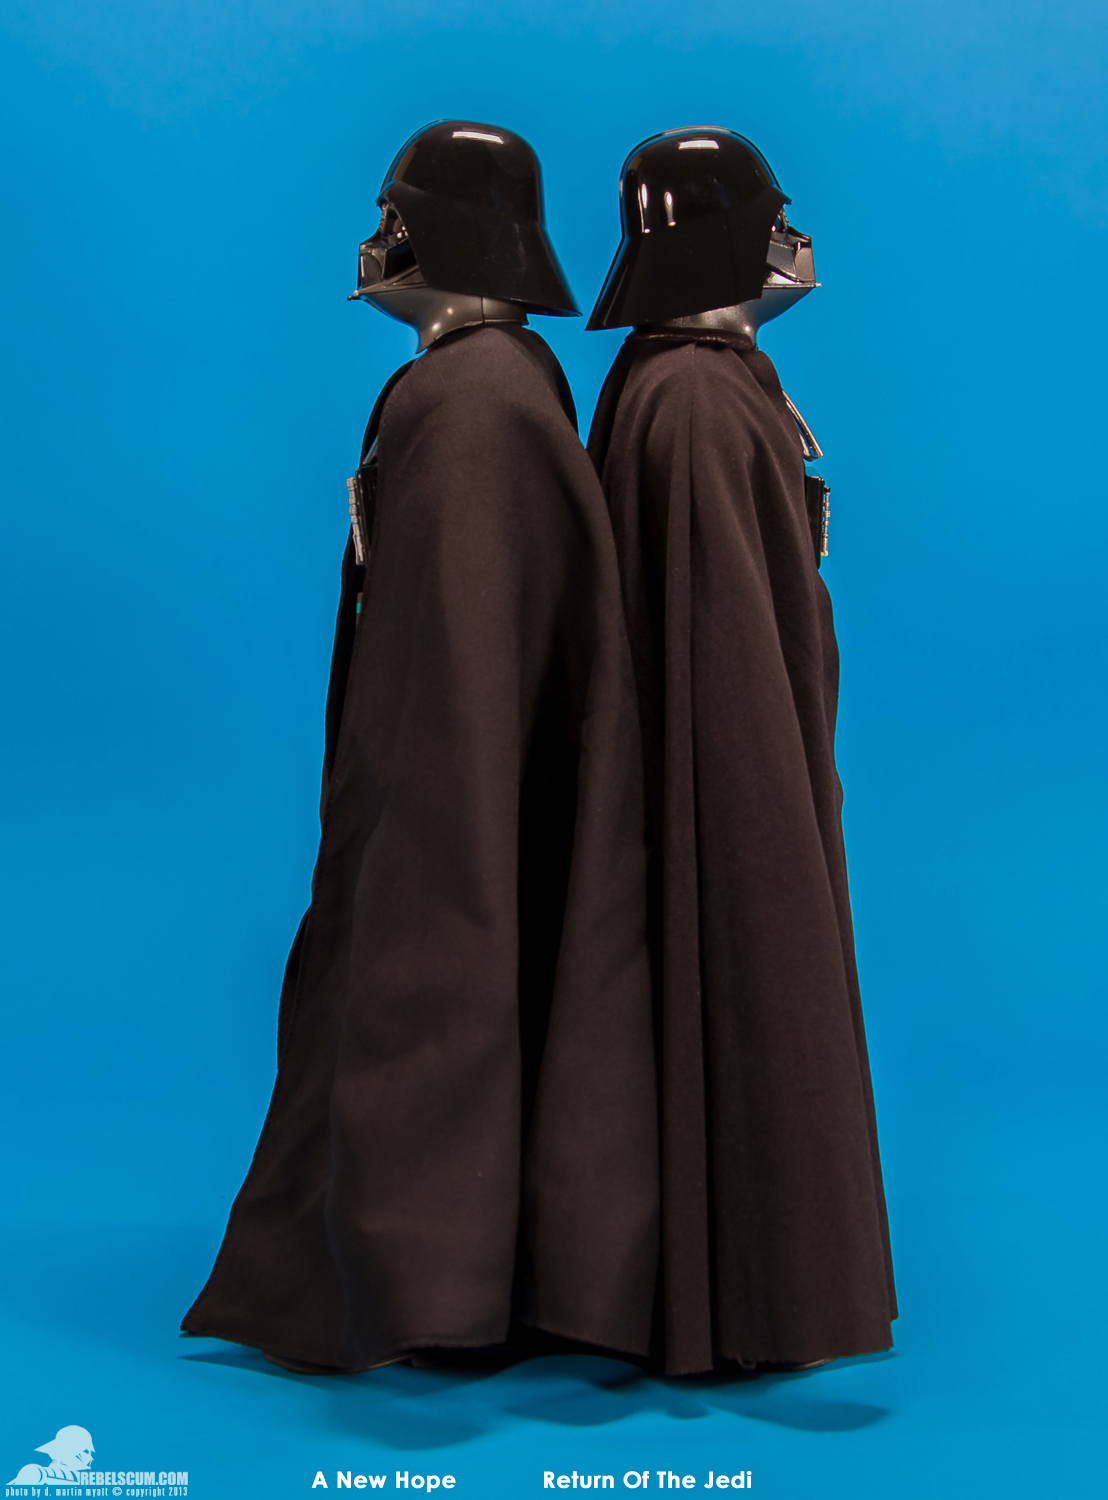 Darth-Vader-Return-Of-The-Jedi-Sixth-Scale-Sideshow-Collectibles-053.jpg